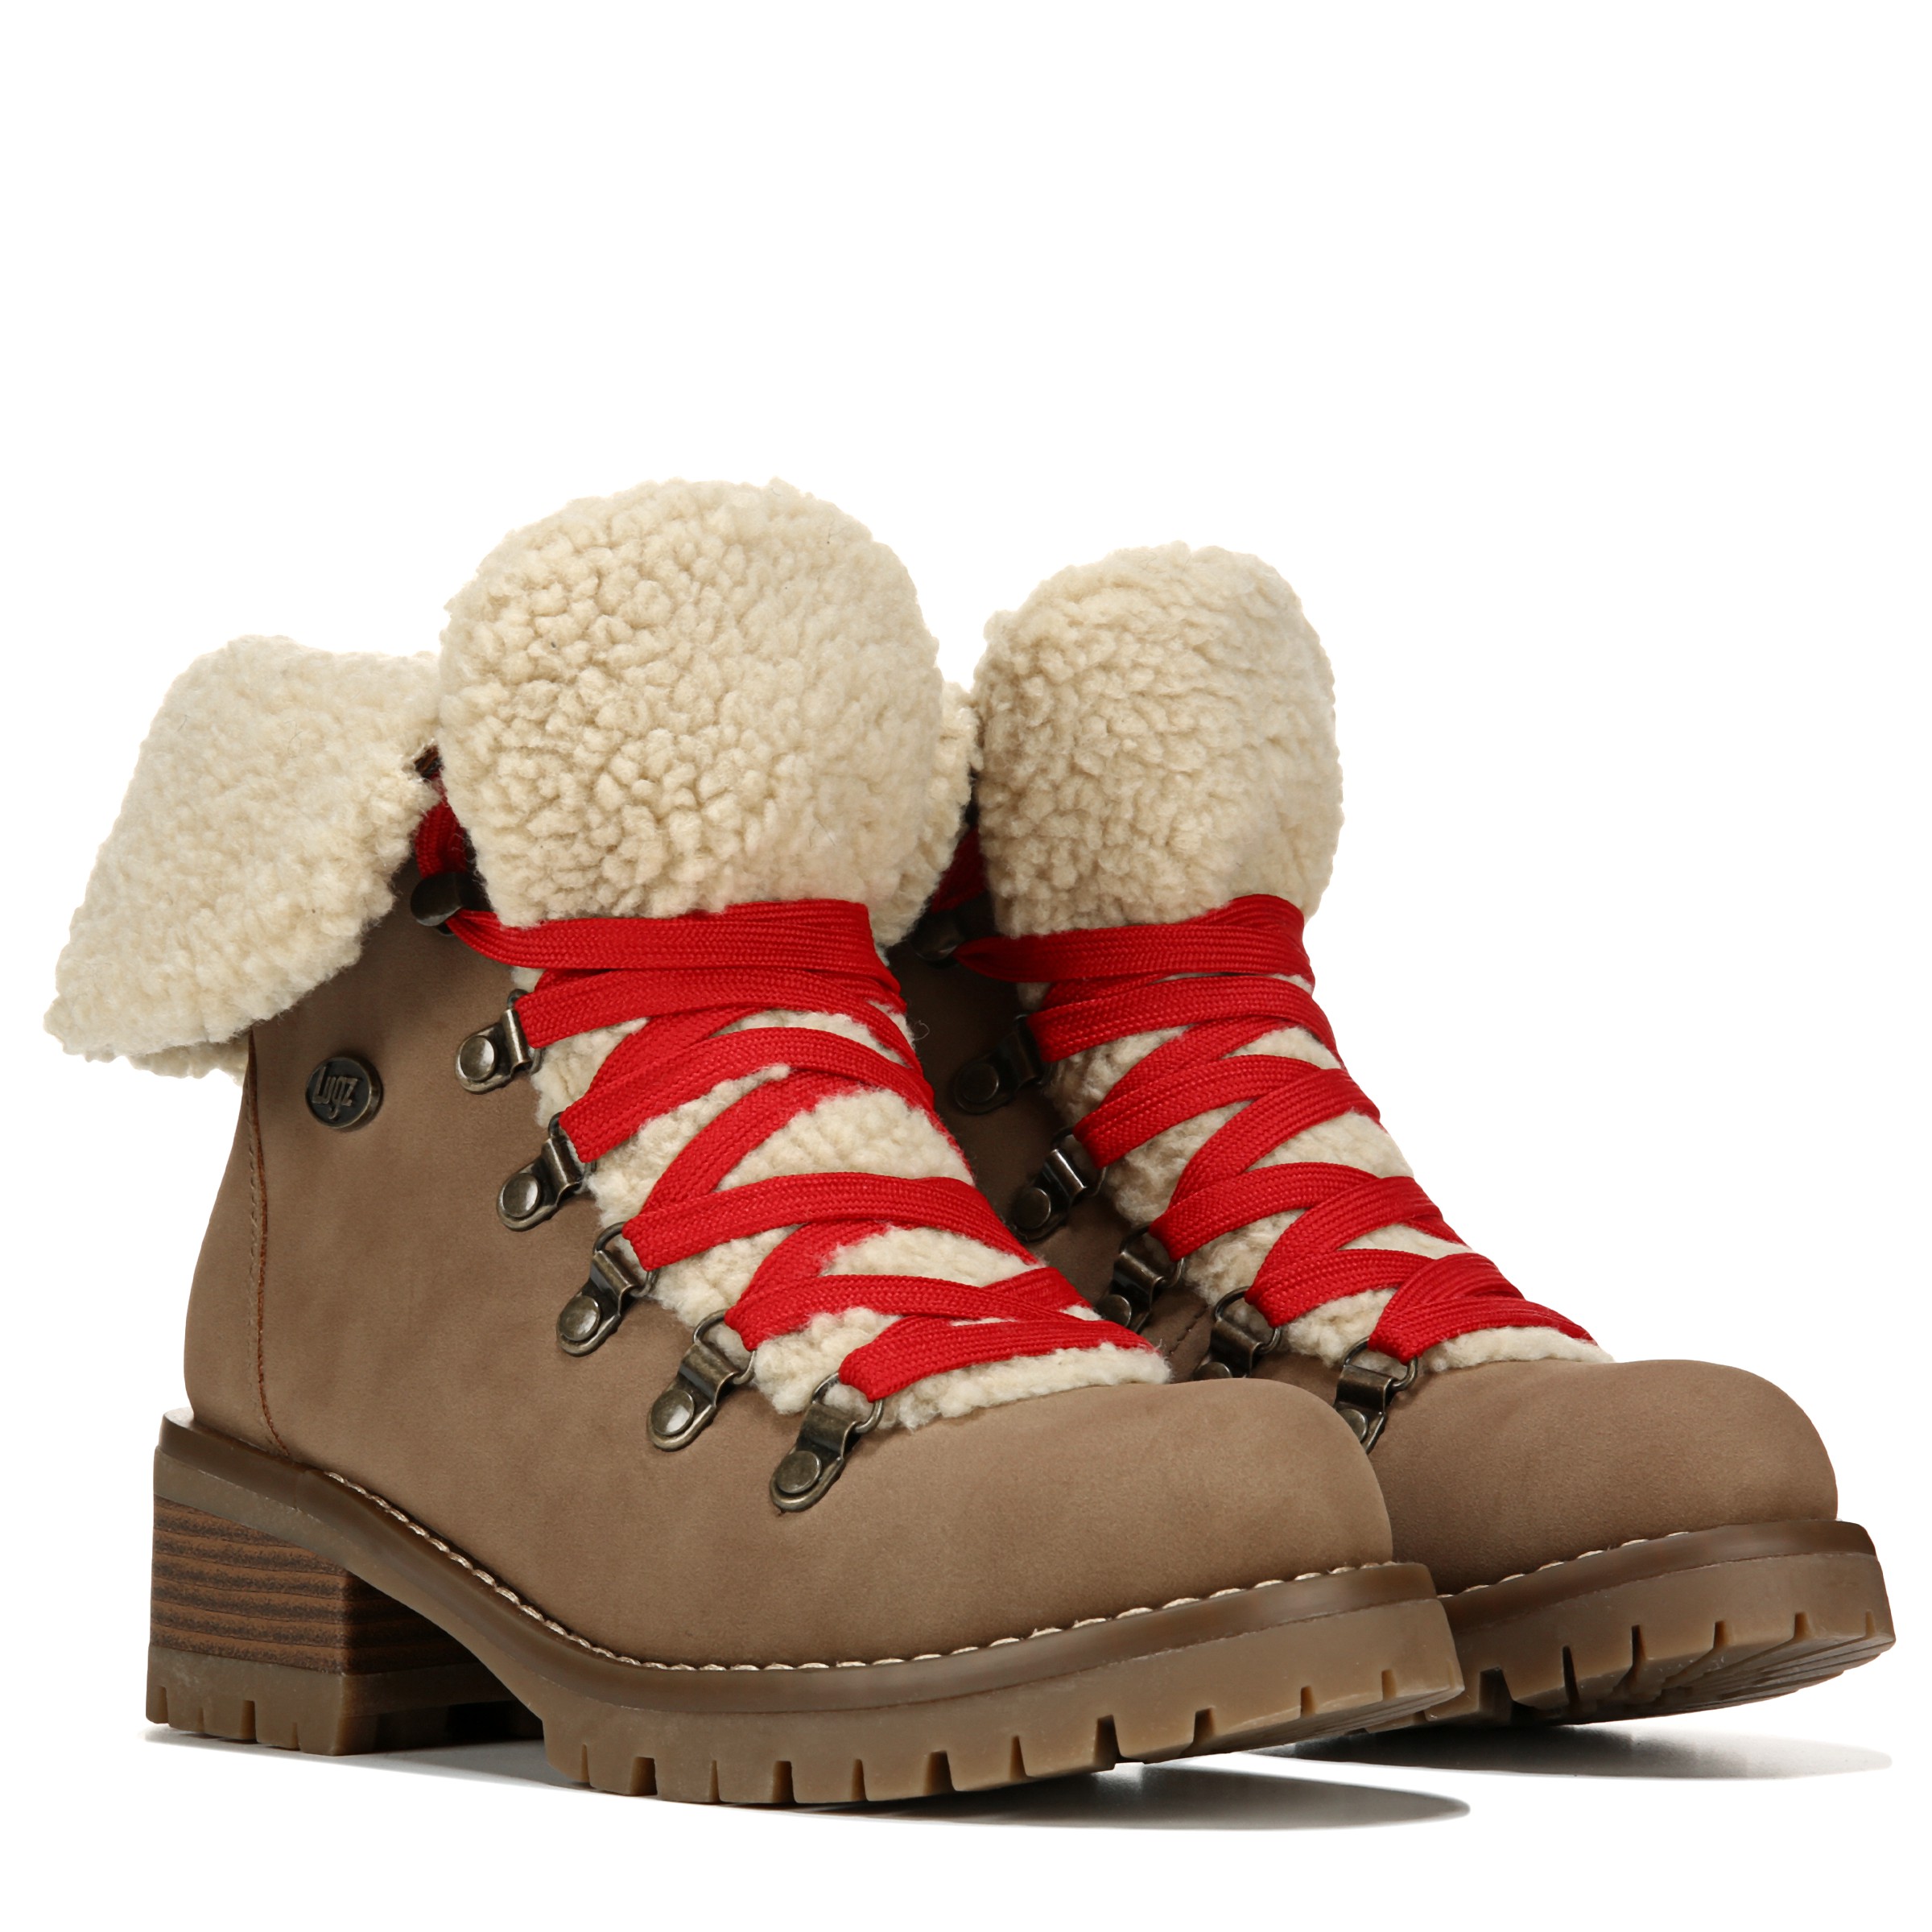 Details about   Casual Womens Fur Lining Winter Round Toe Lace Up Shoes Anow Ankle Boots @BT02 